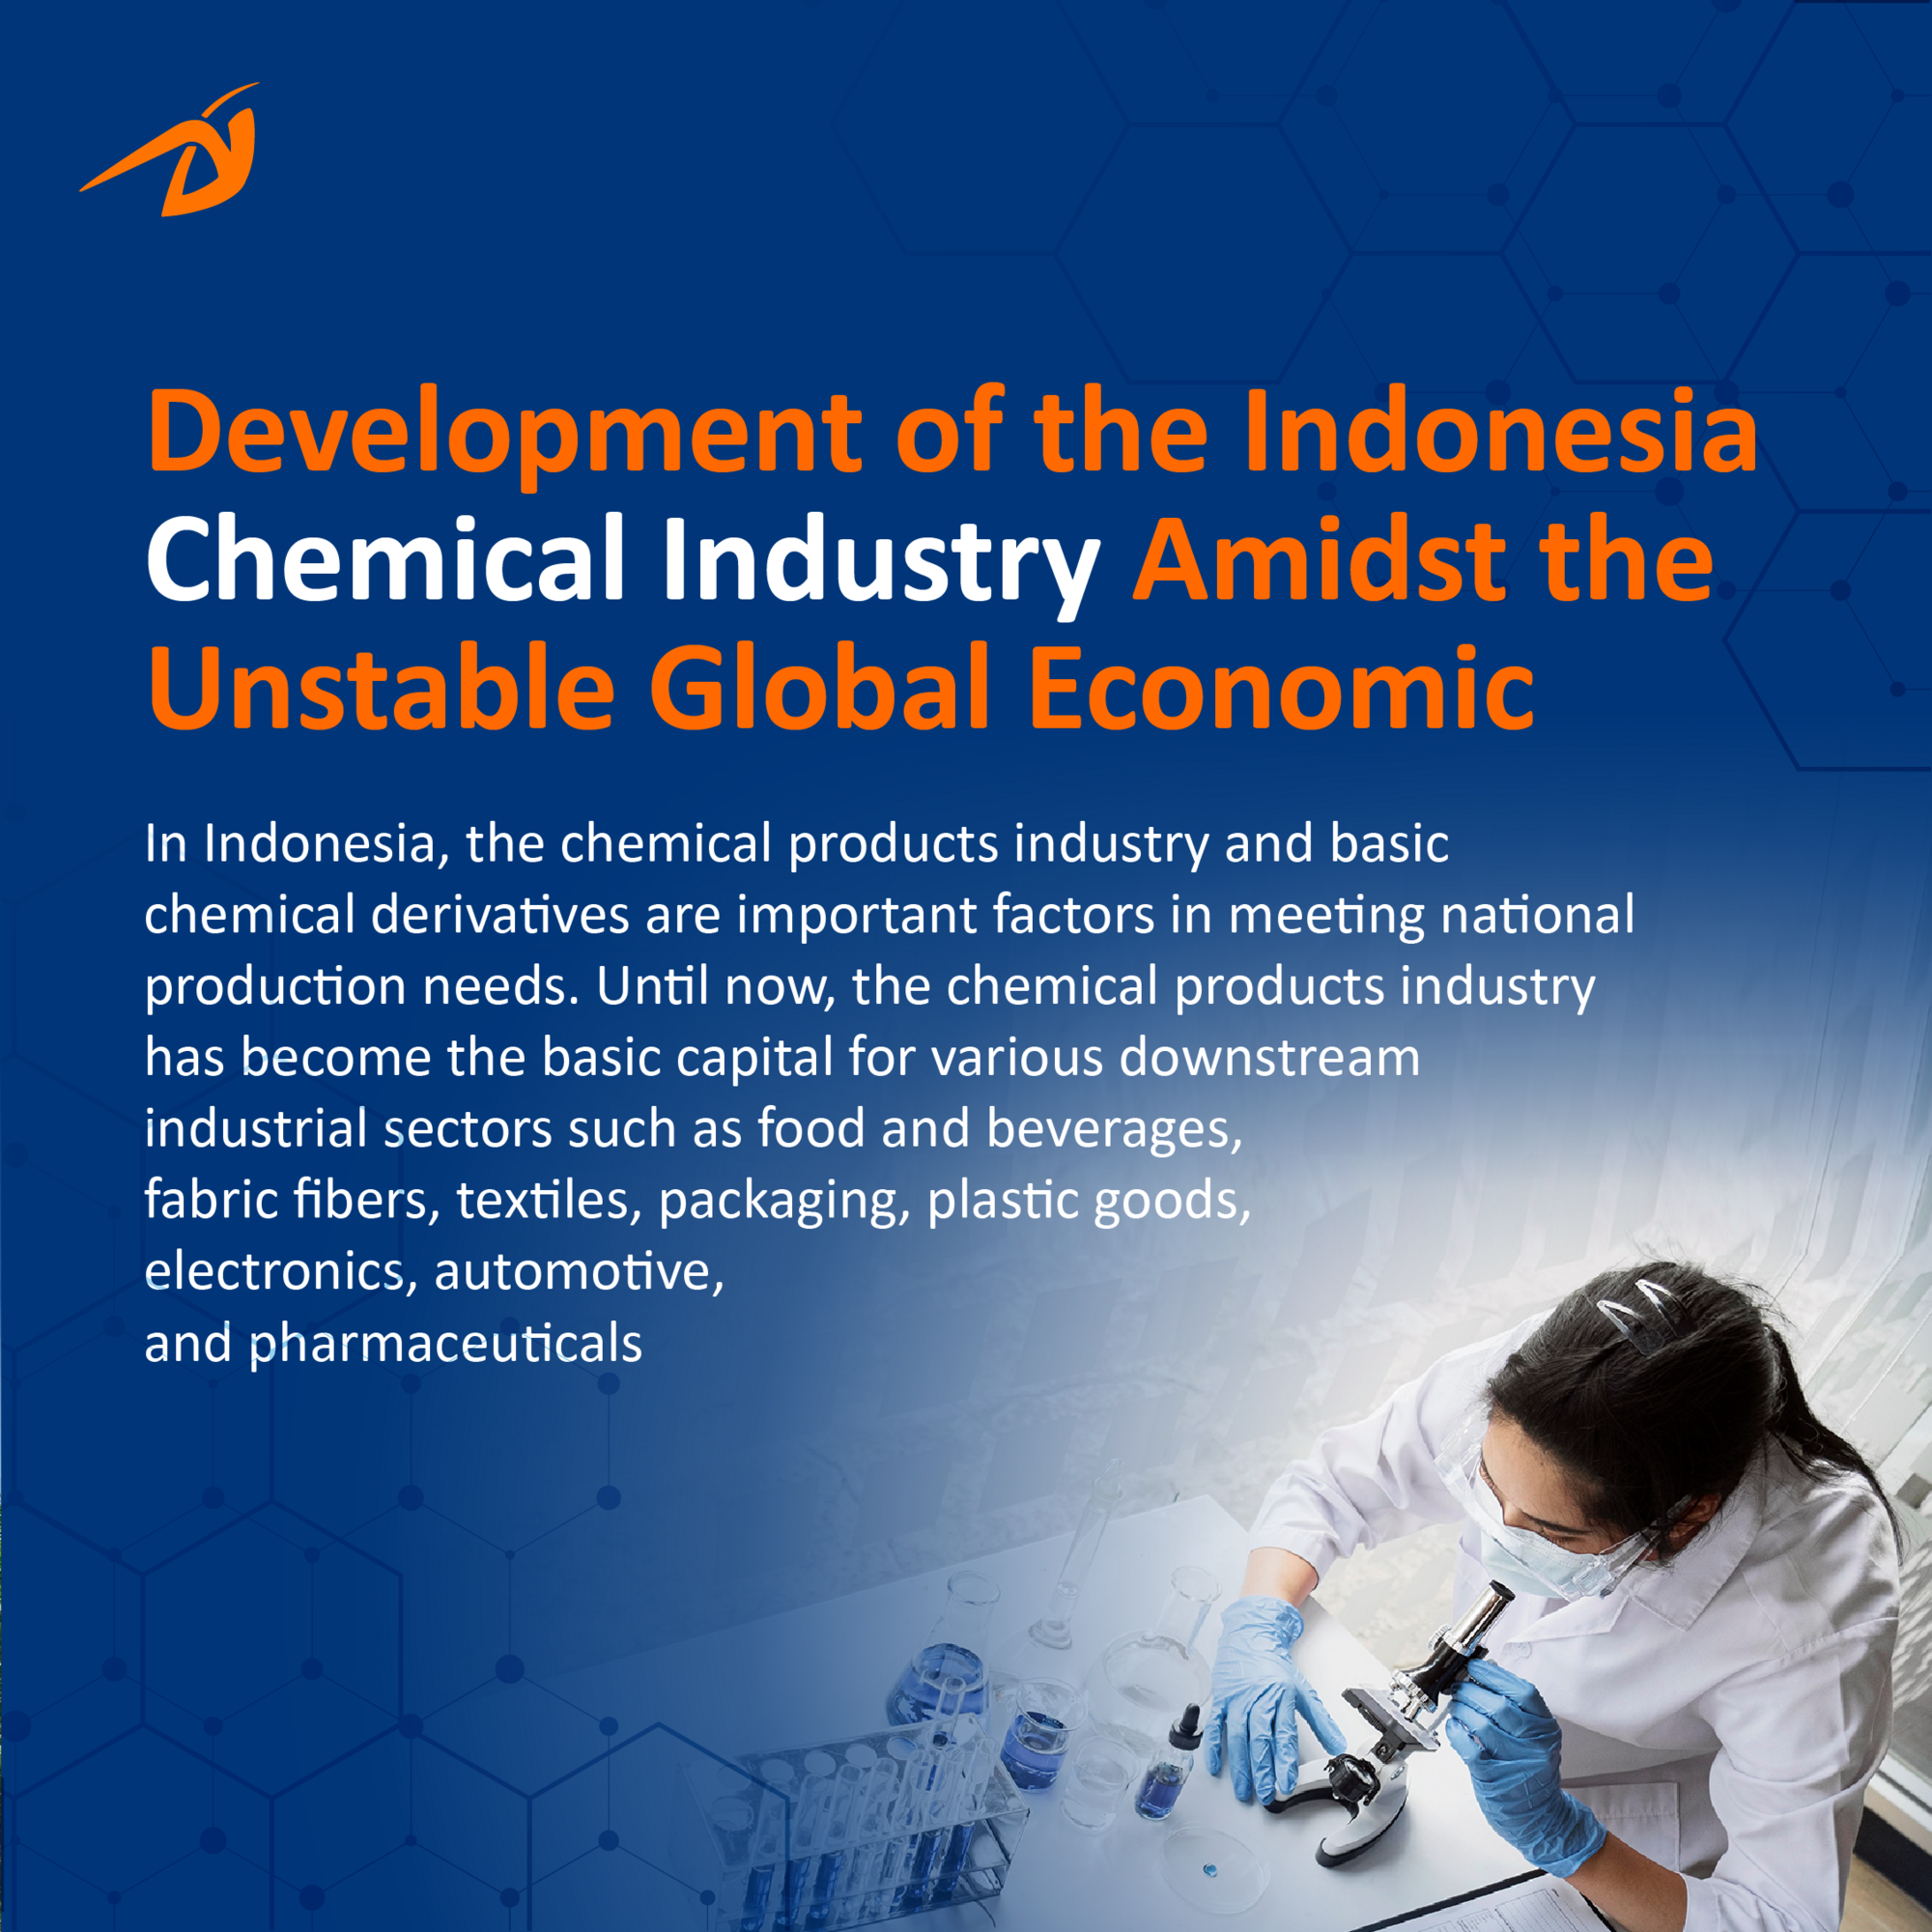 DEVELOPMENT OF THE INDONESIAN CHEMICAL INDUSTRY AMIDST THE UNSTABLE GLOBAL ECONOMIC